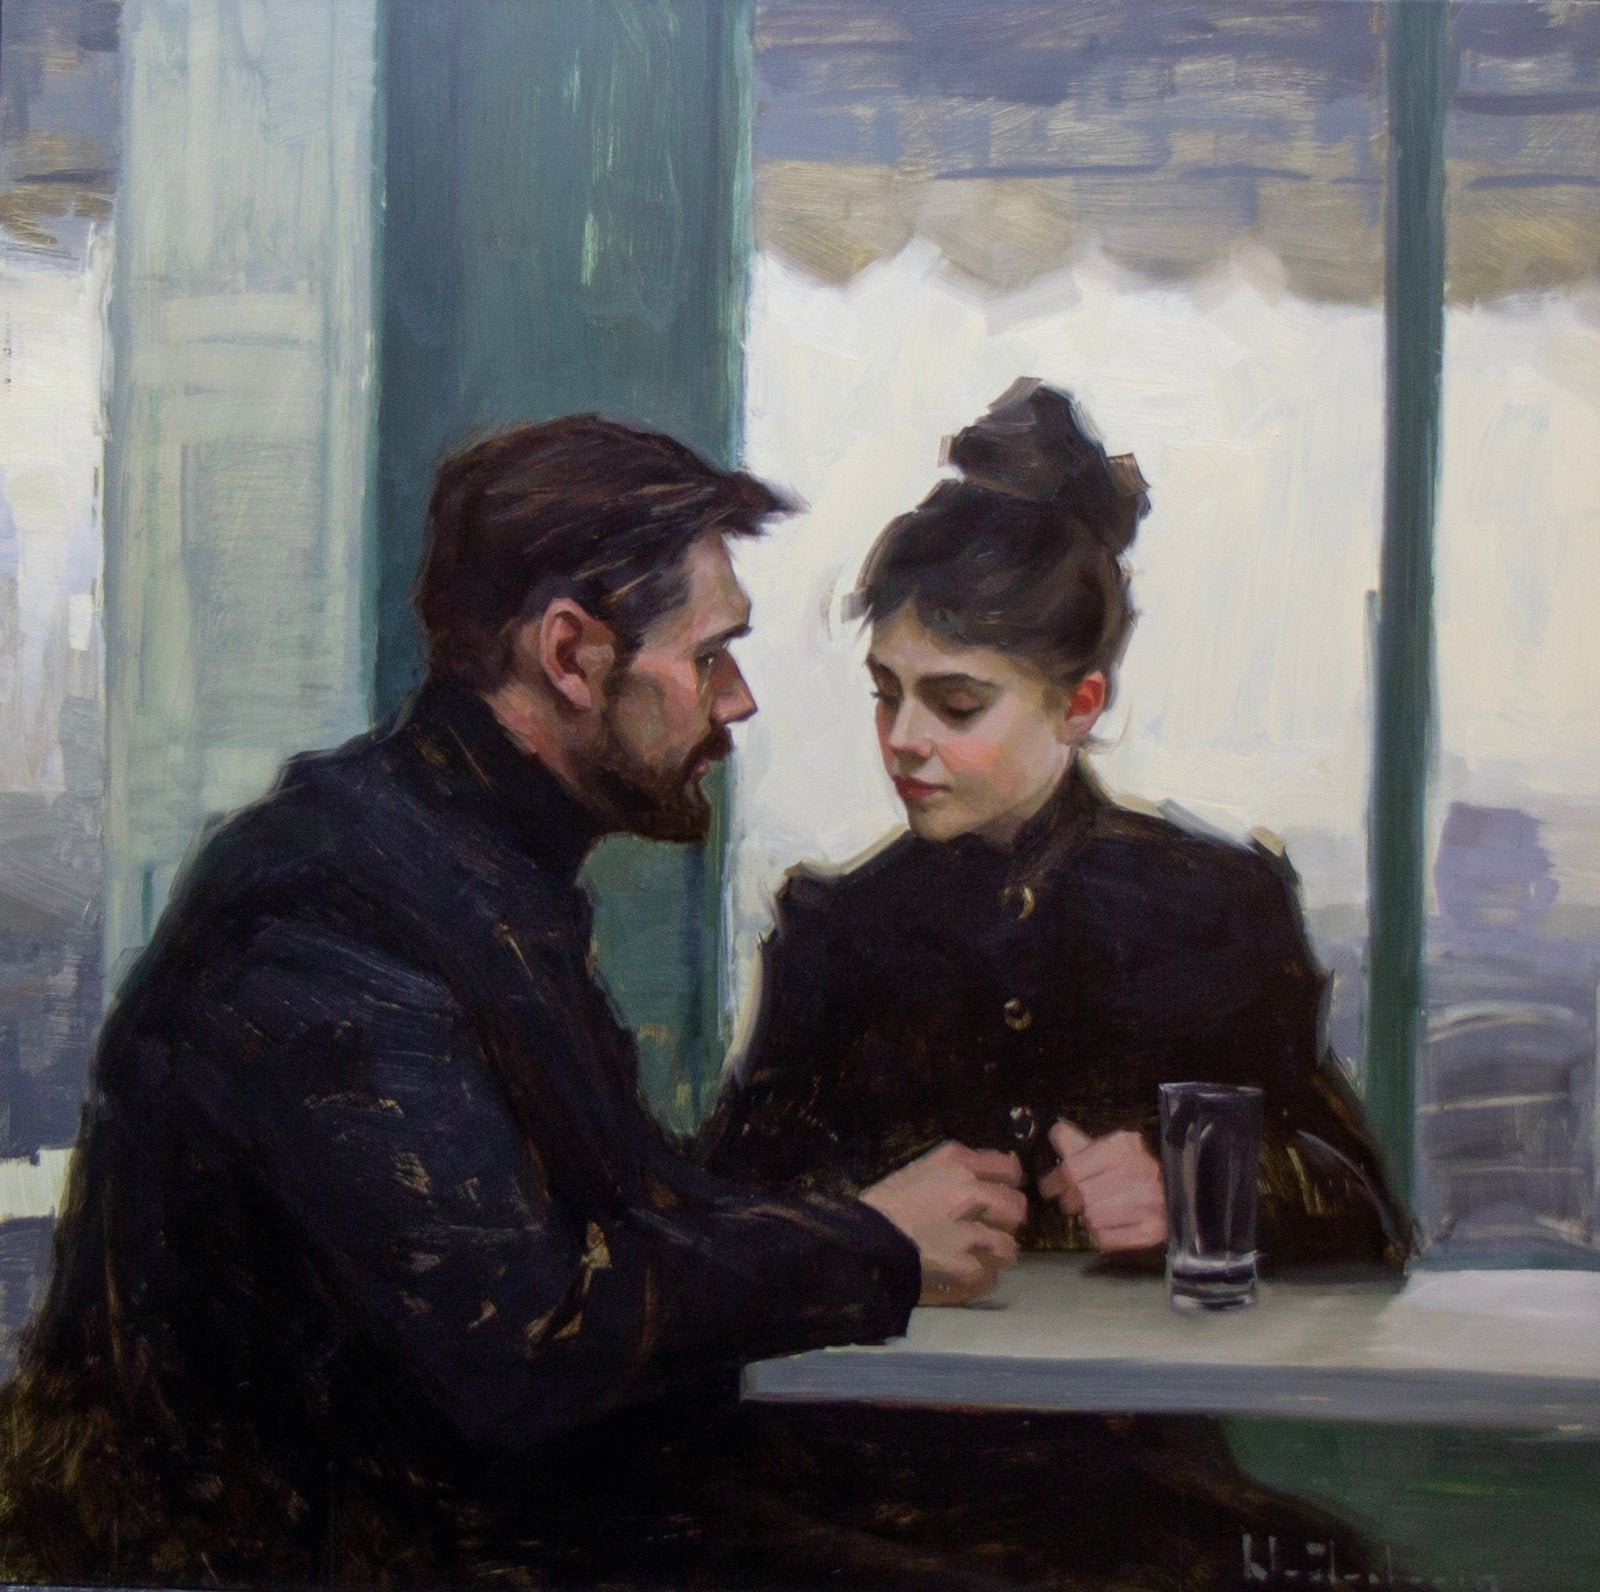 Cafe Impressions by Aaron Westerberg at LePrince Galleries